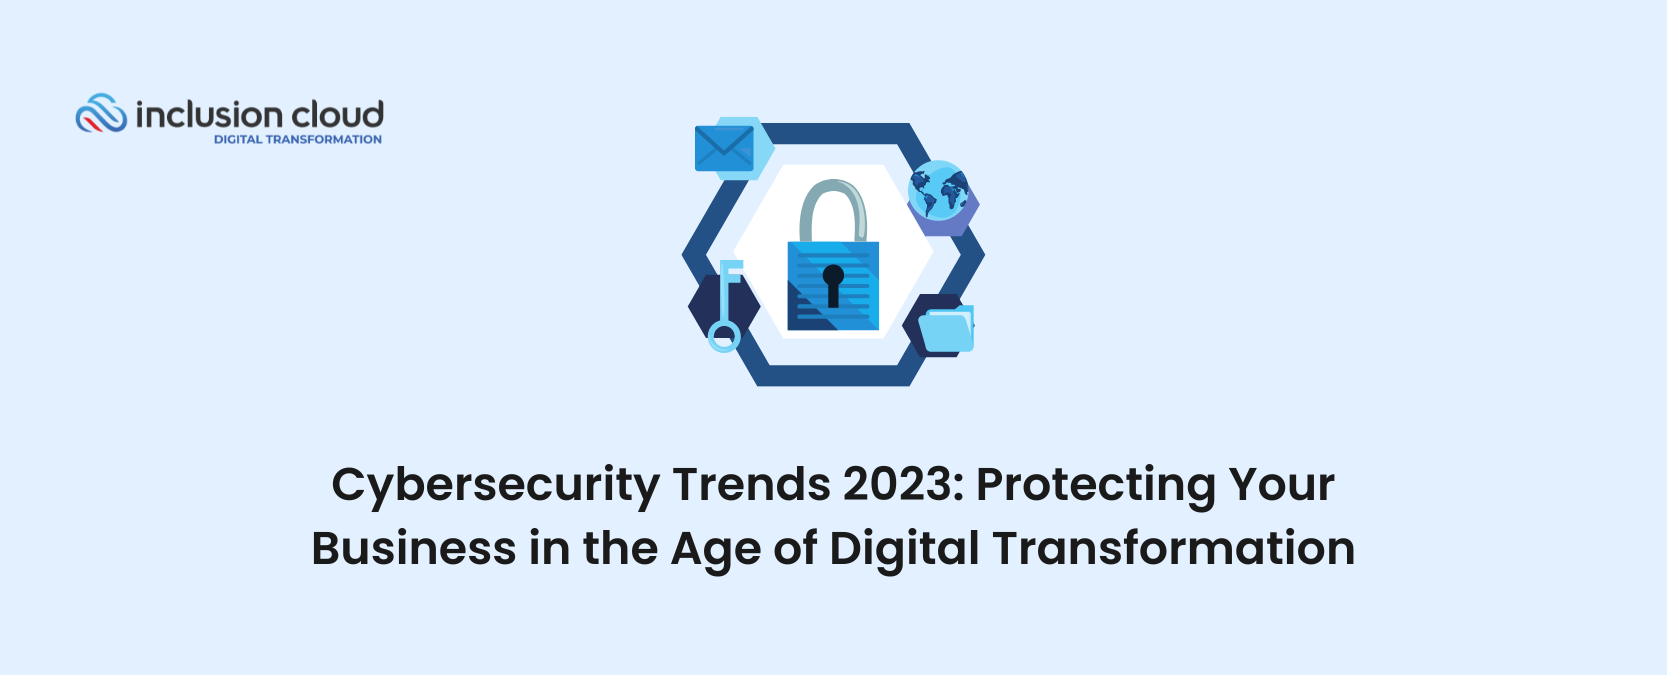 Cybersecurity Trends in 2023 Protecting Your Business in the Age of Digital Transformation